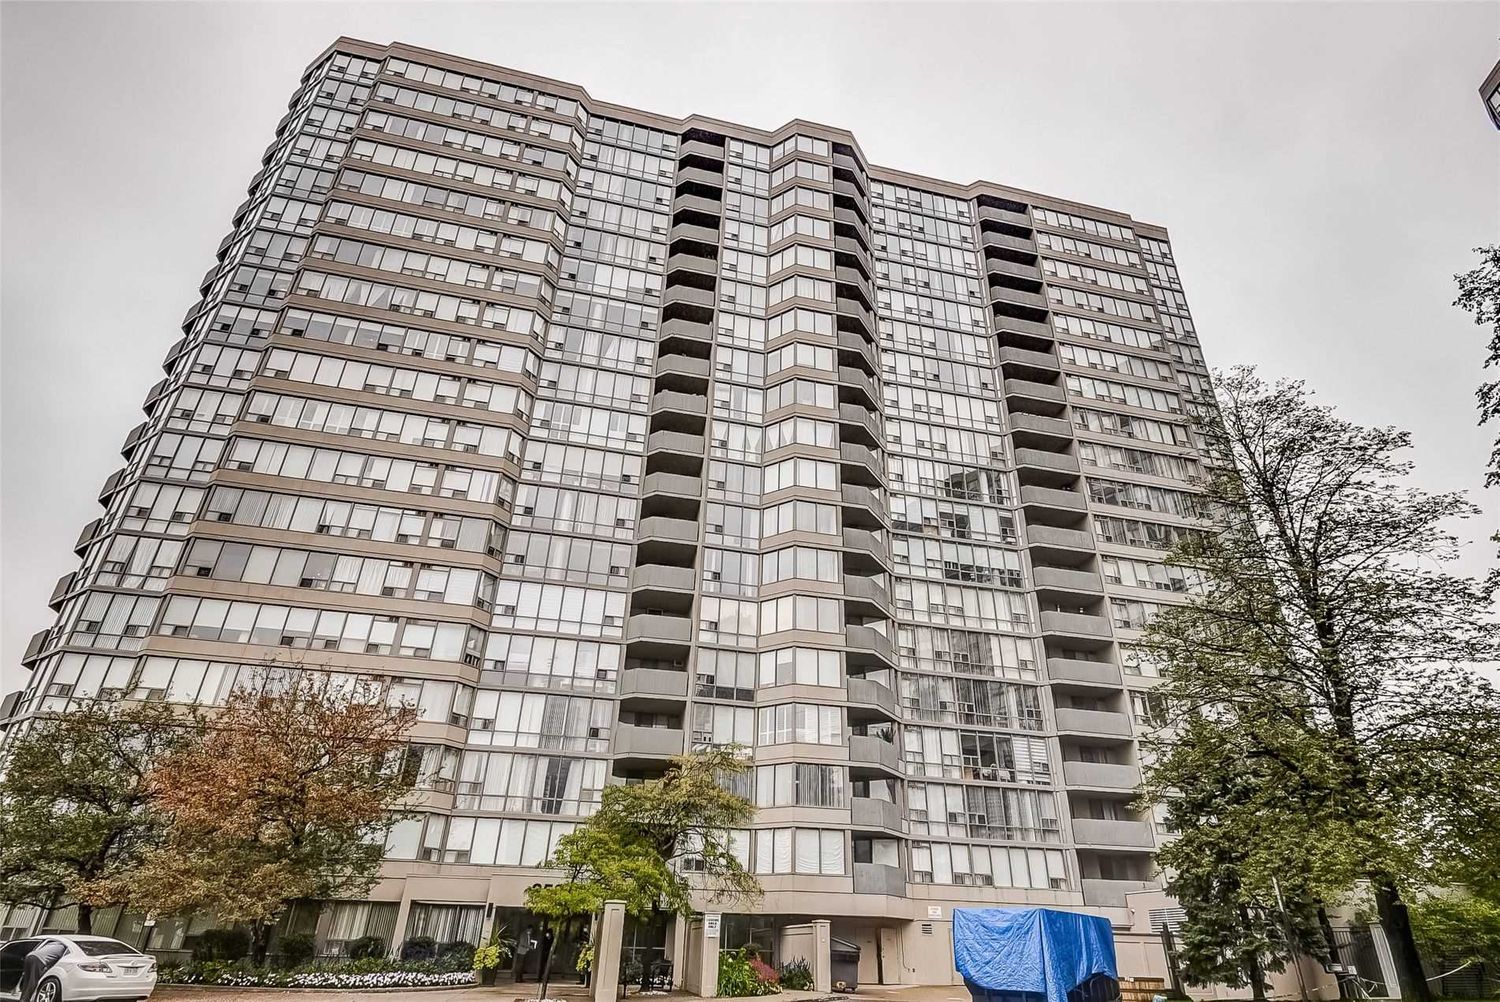 330 Rathburn Road W. Centre I & Centre II Condos is located in  Mississauga, Toronto - image #2 of 3